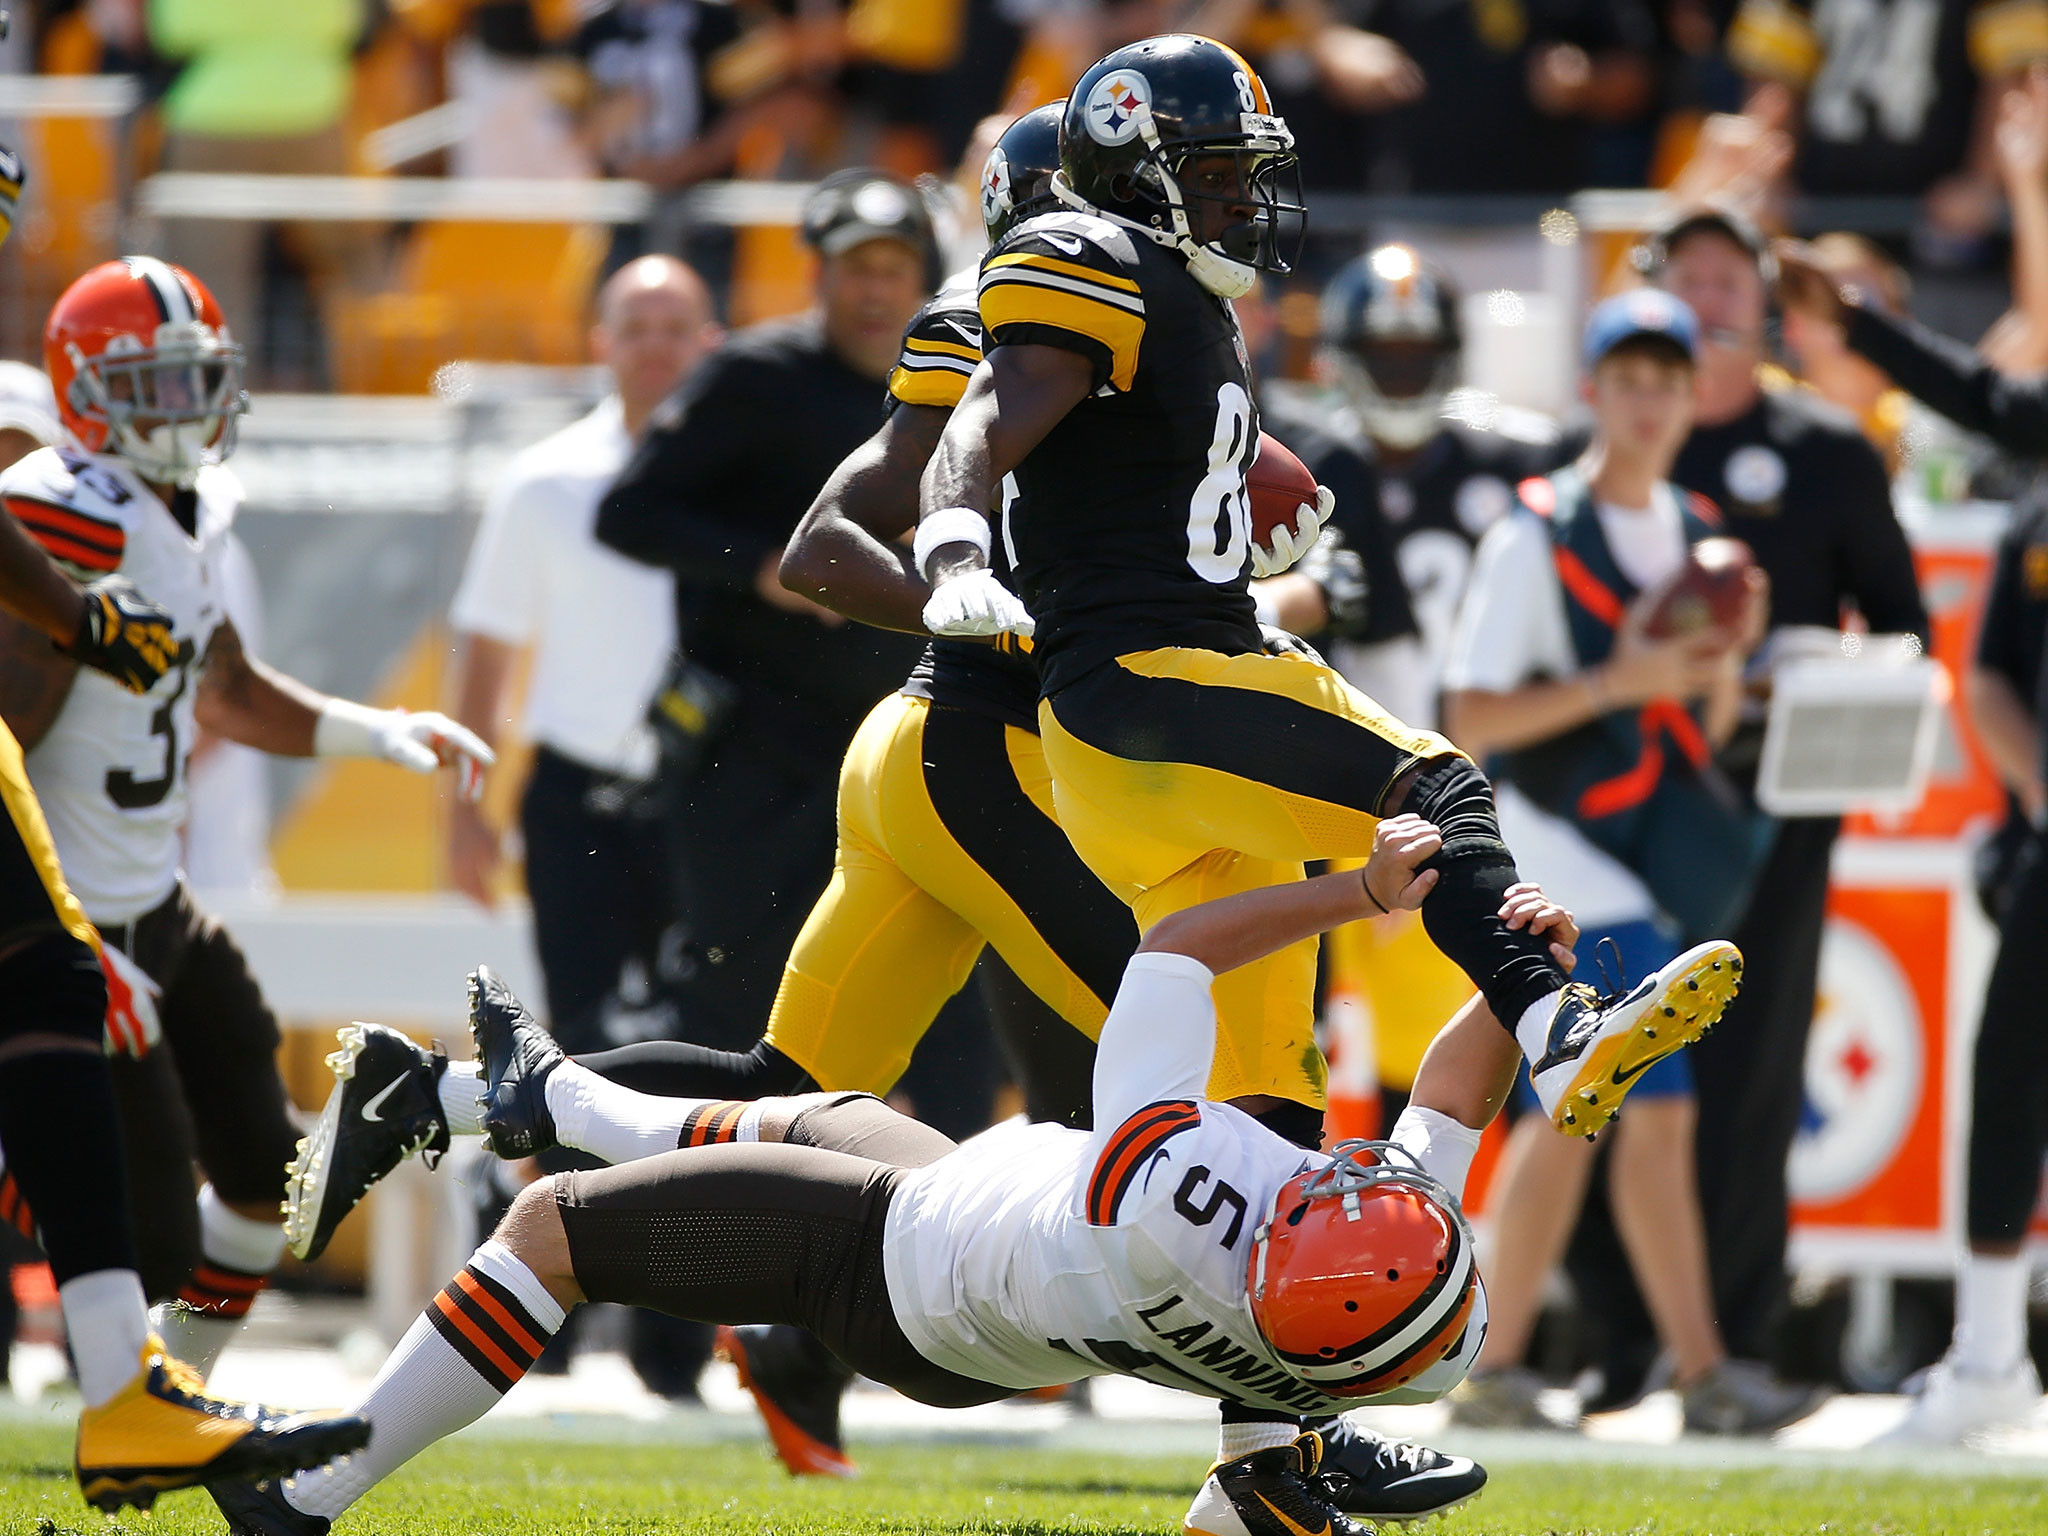 2048x1536 Antonio Brown karate kicks Spencer Lanning in the face during Pittsburgh  Steelers victory over Cleveland Browns | The Independent